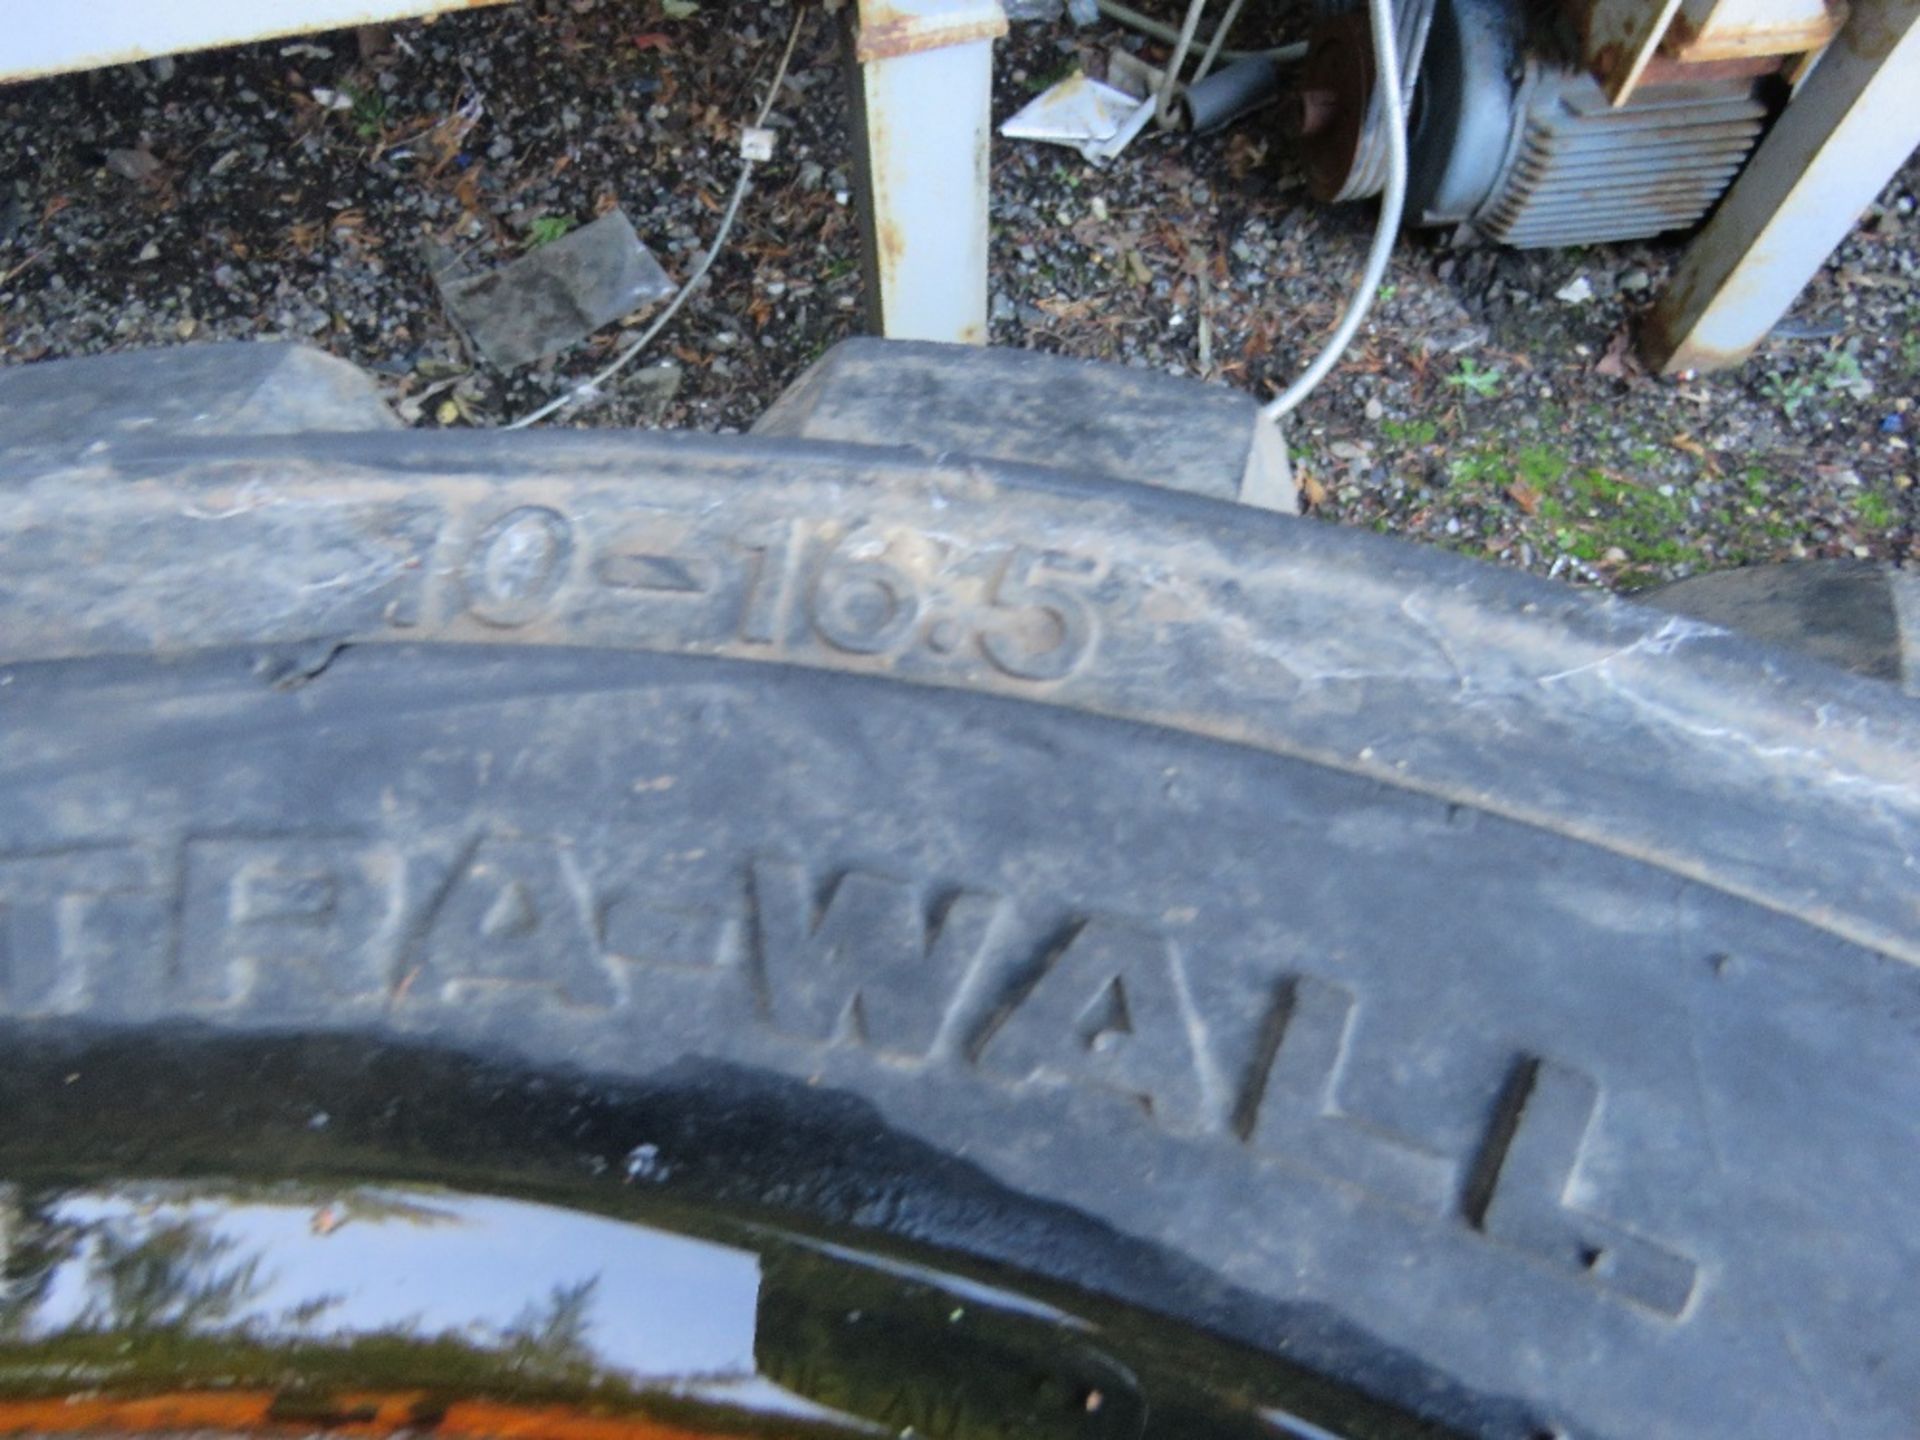 5NO SKID STEER LOADER WHEELS AND TYRES 10-16.5 SIZE. DIRECT FROM LOCAL SMALLHOLDING. THIS LOT IS - Image 5 of 5